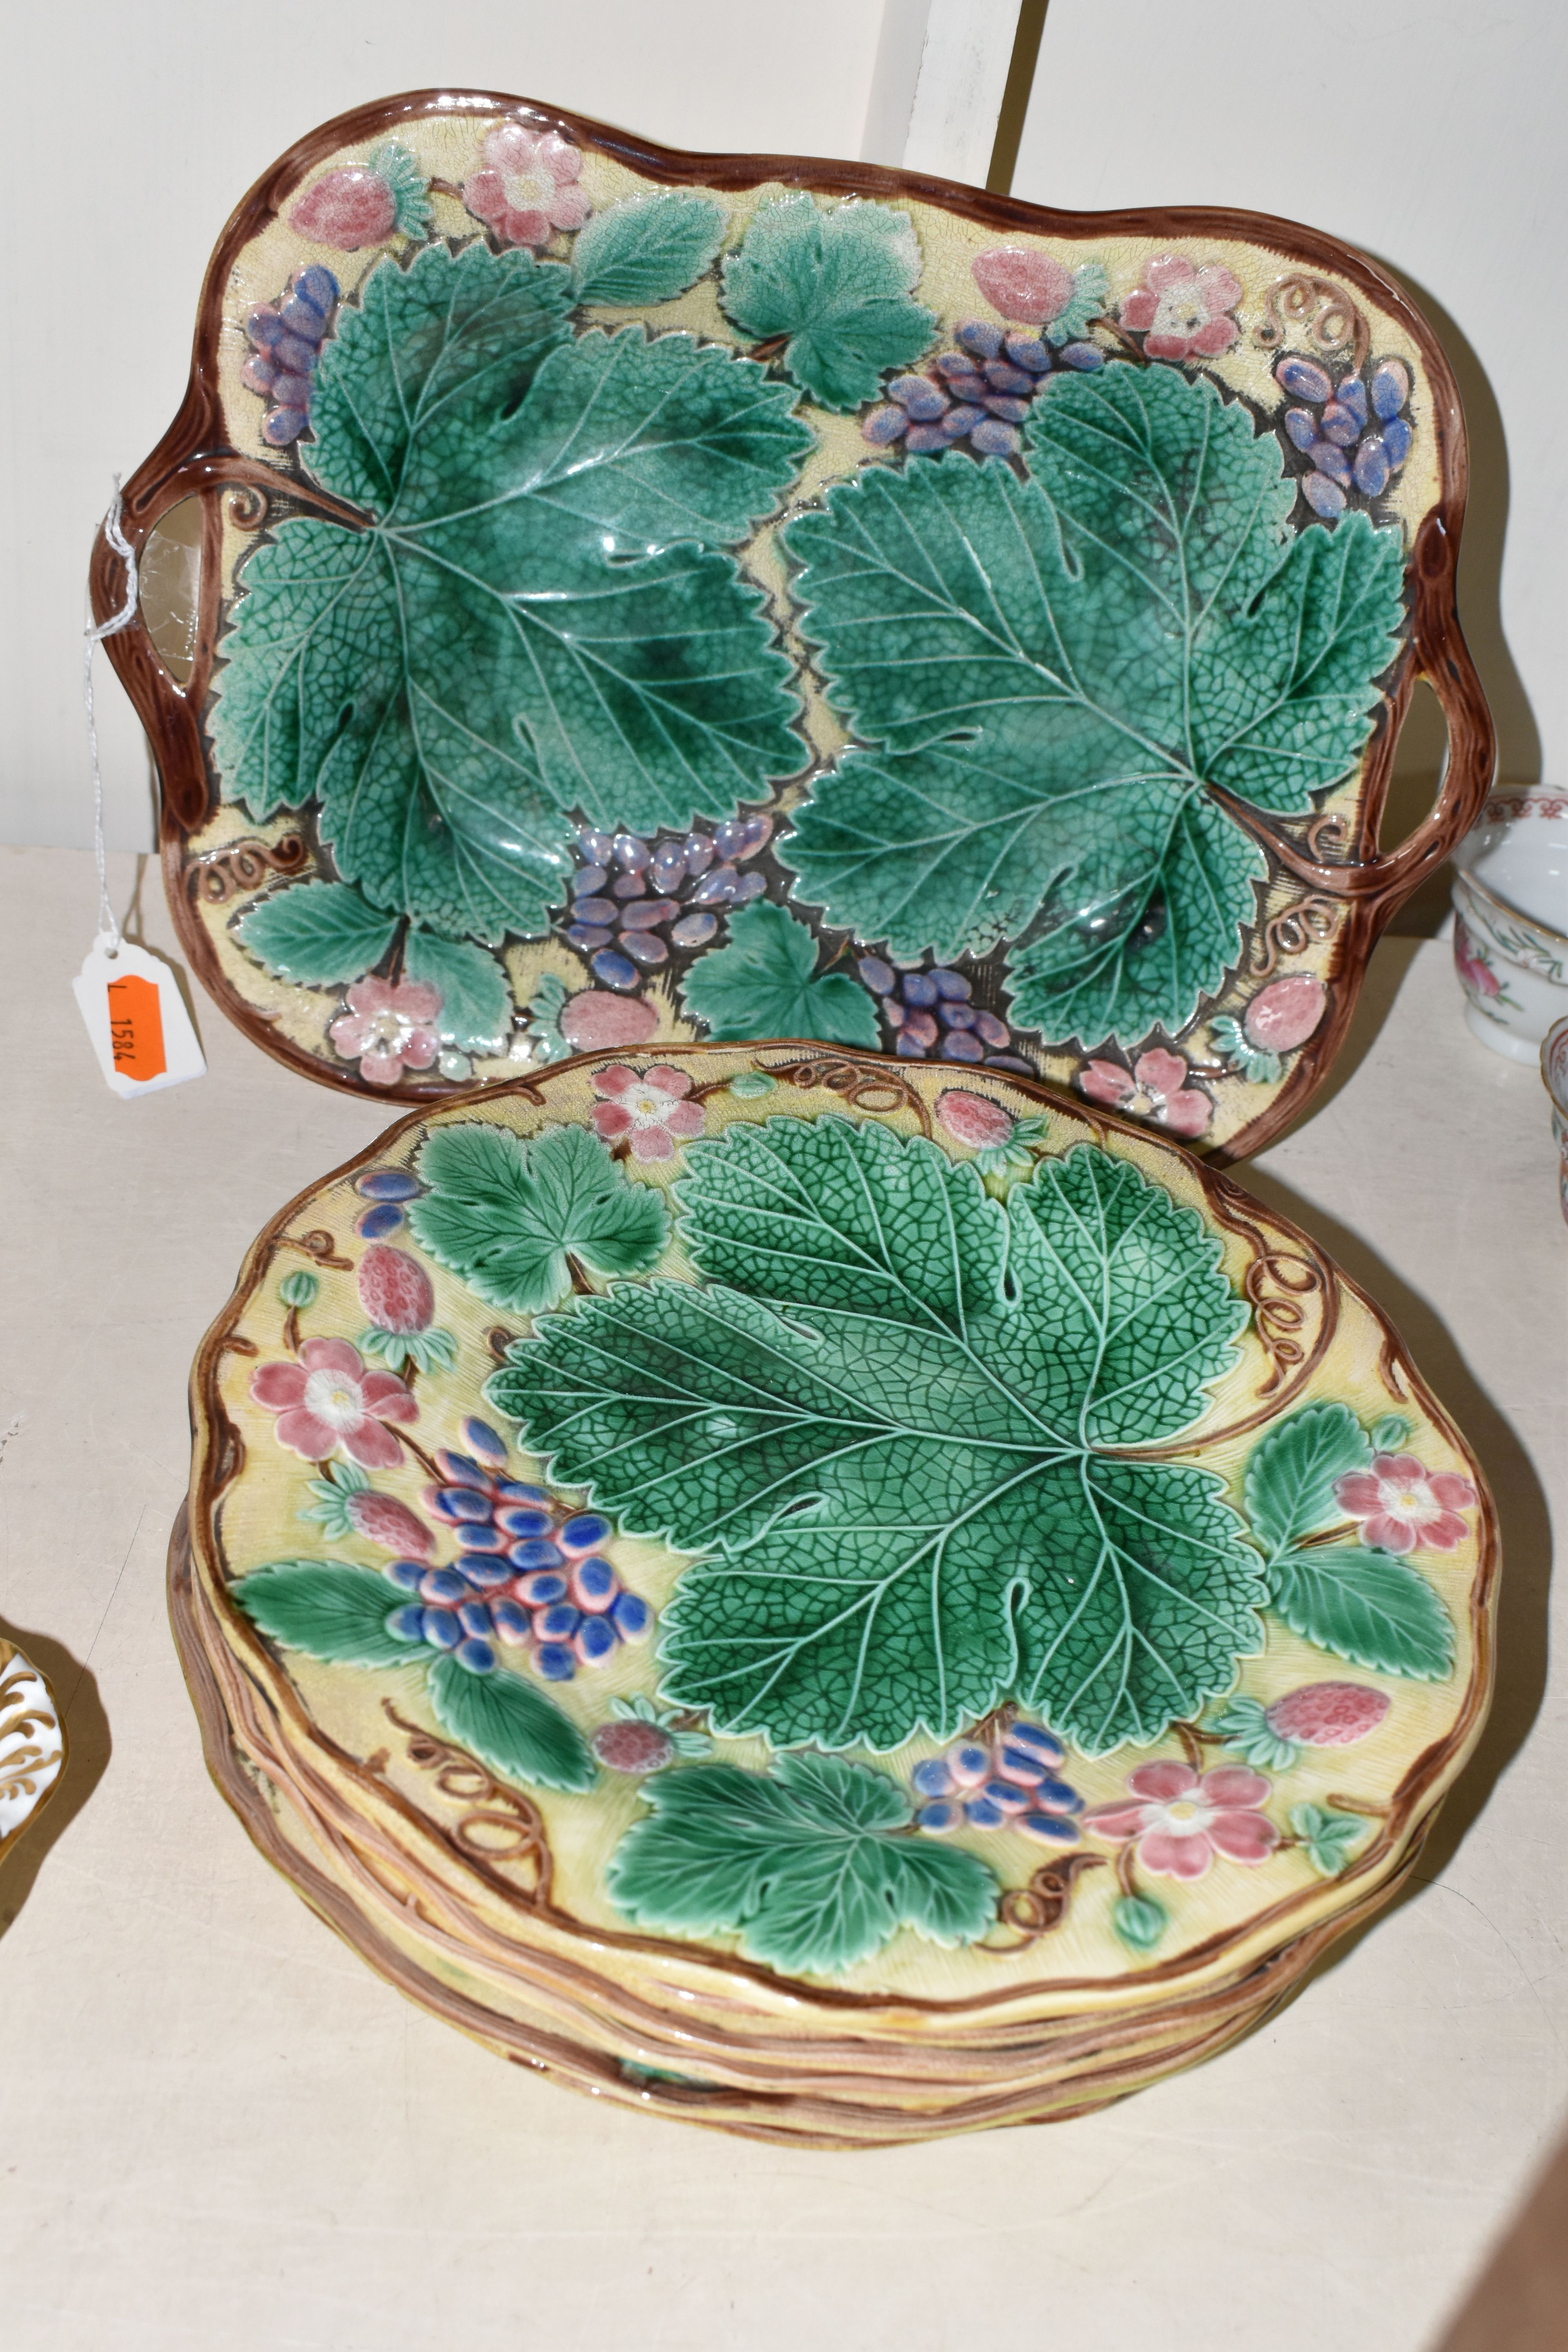 A SEVEN PIECE WEDGWOOD MAJOLICA PART DESSERT SERVICE, decorated with relief moulded vines and